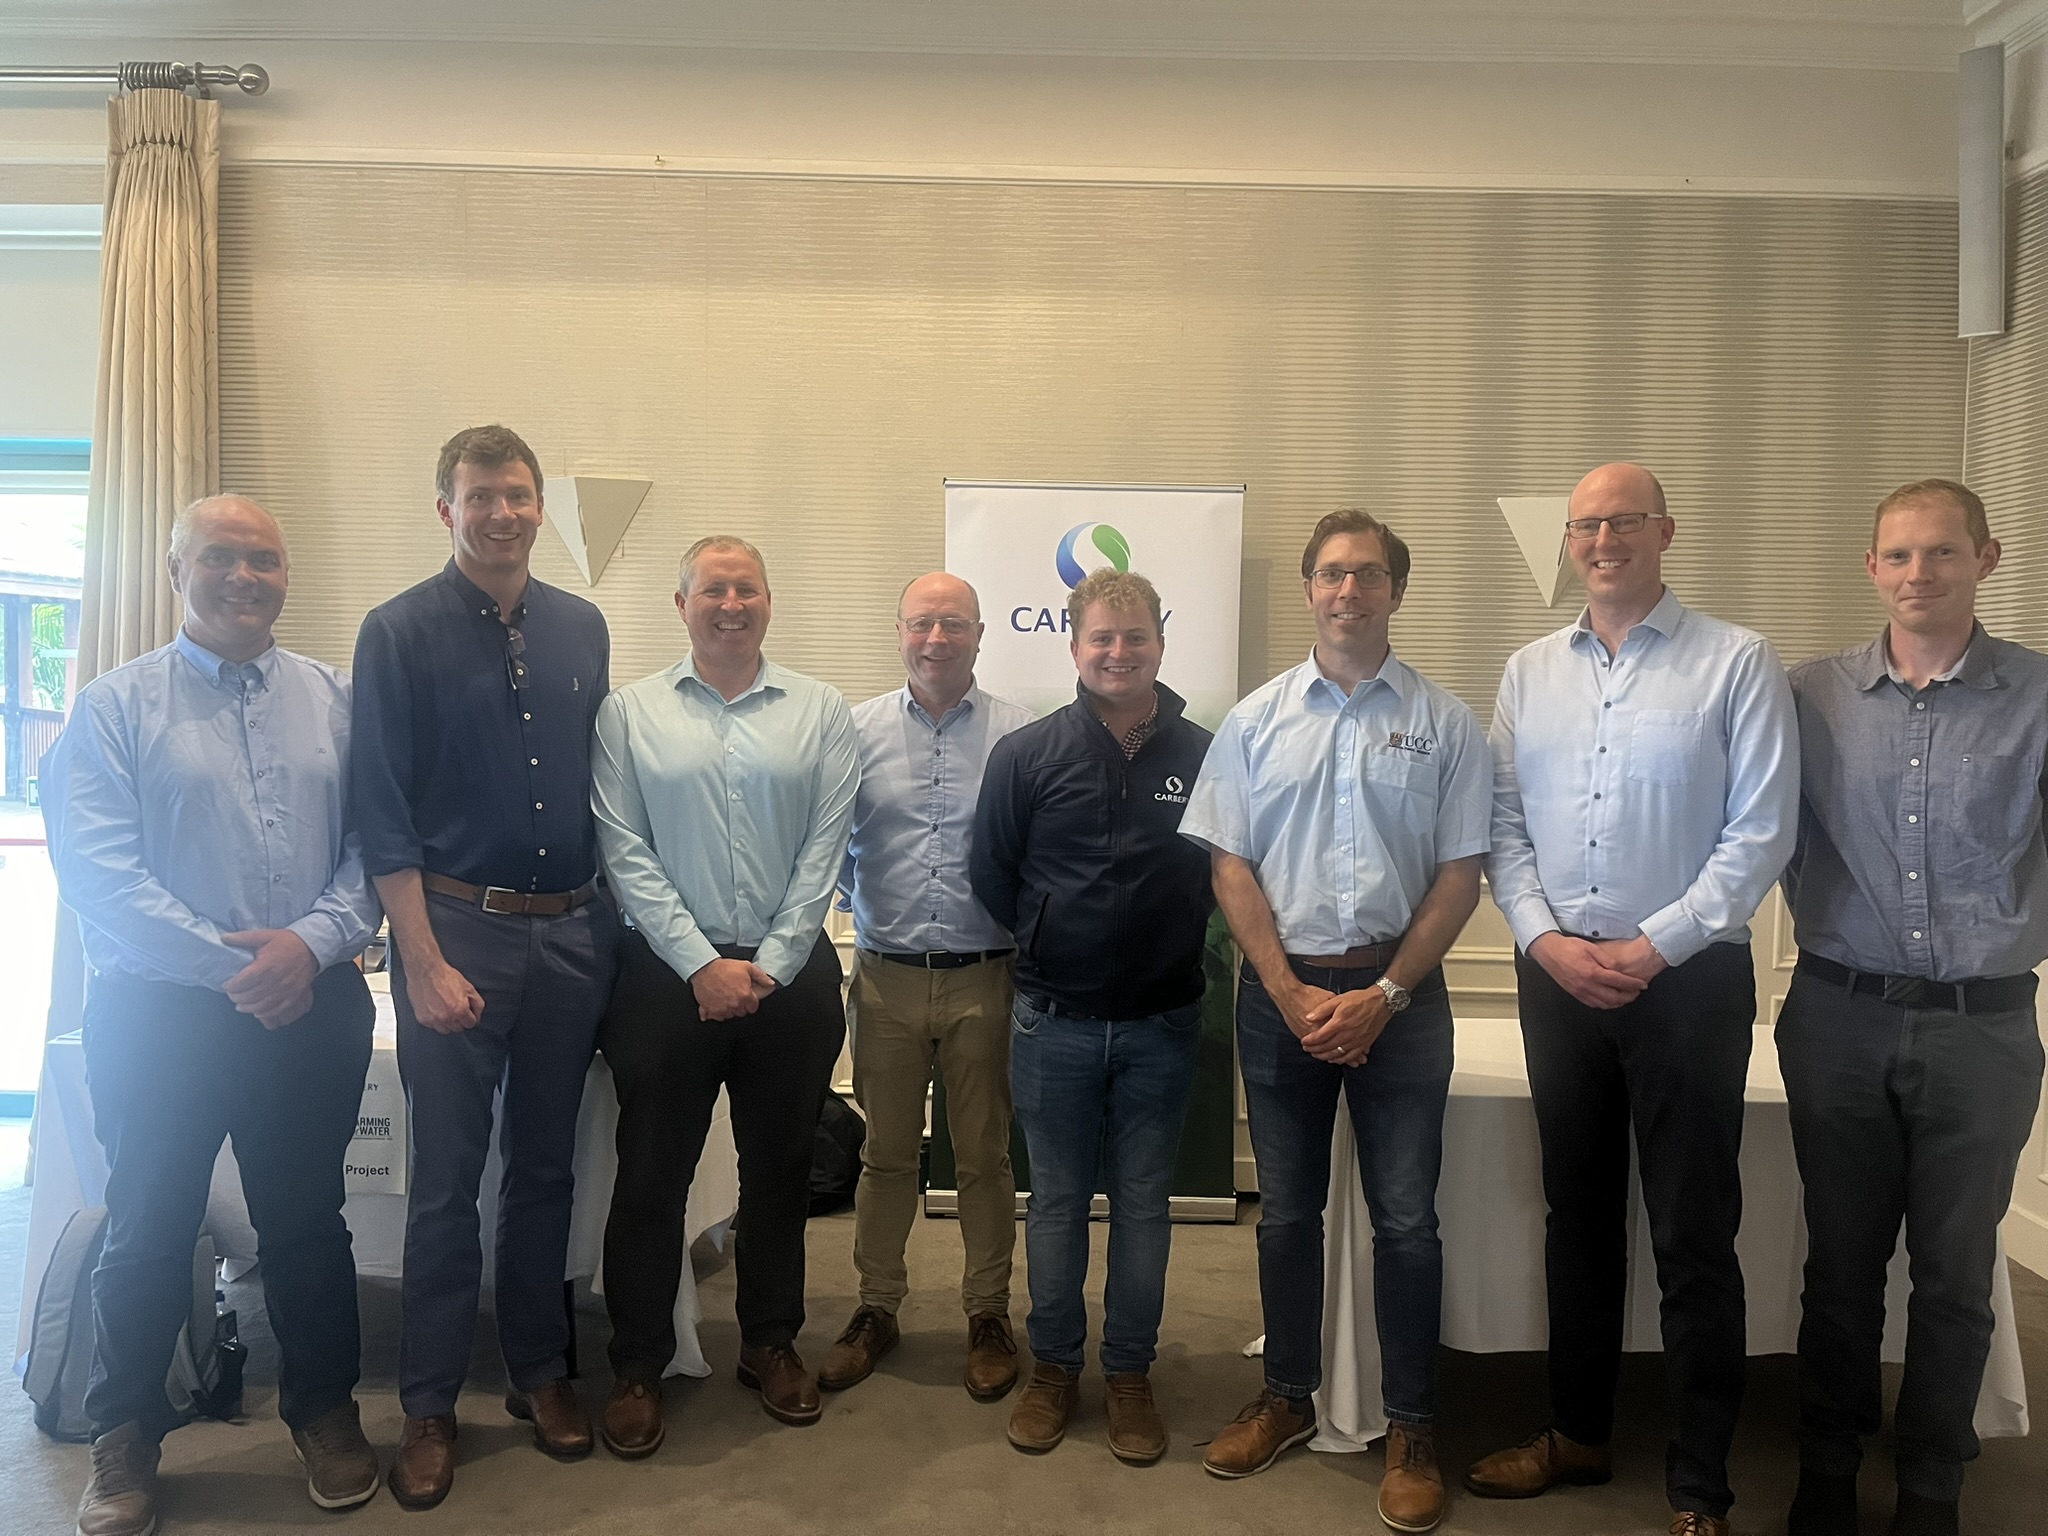 8 people representing the Carbery organisers and members of the panel at the Carbery Slurry Solutions event in Rosscarbery on 25 June